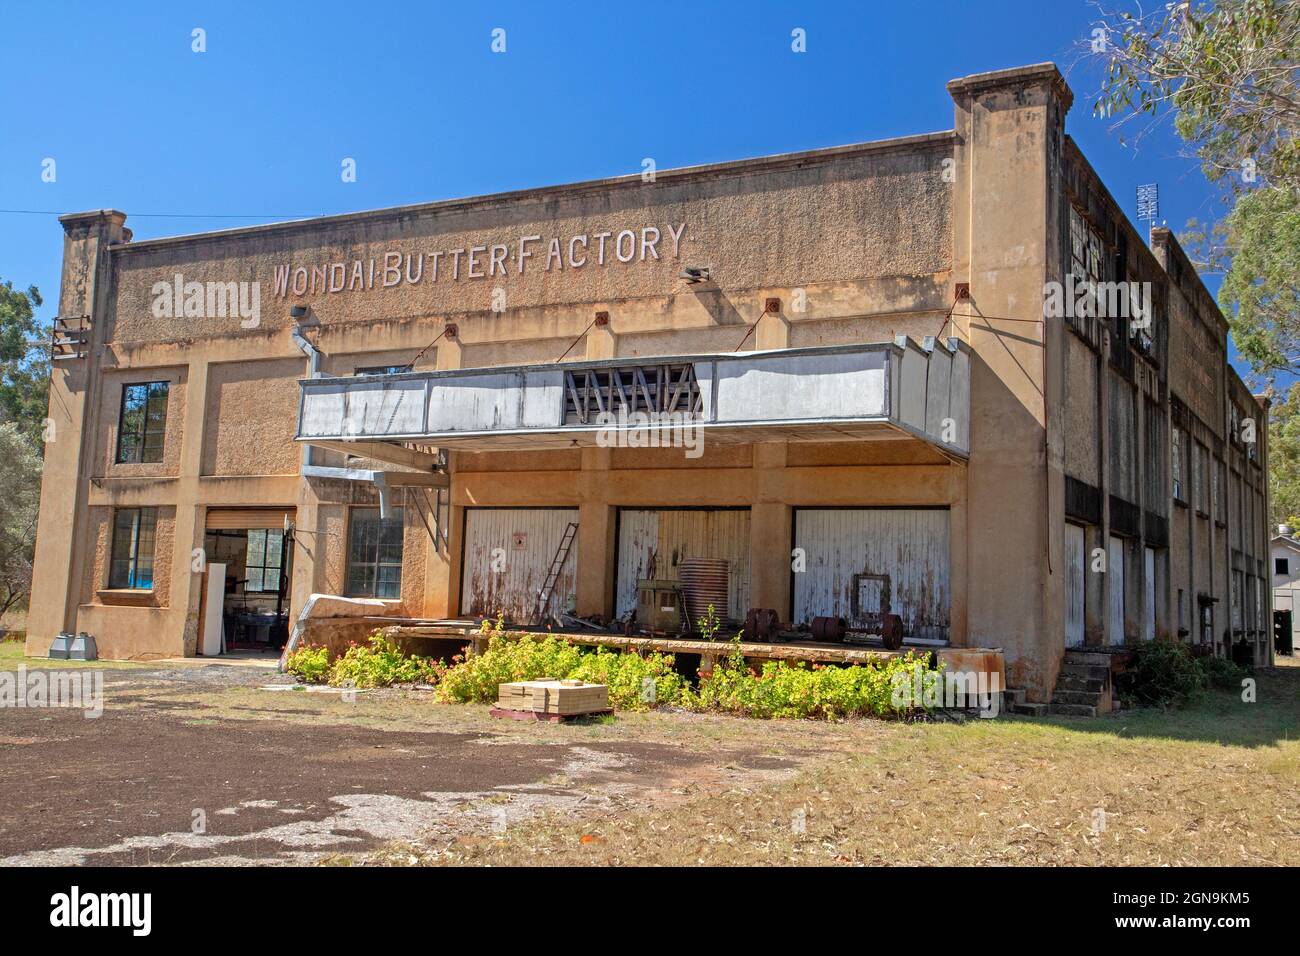 Old butter factory in Wondai Stock Photo